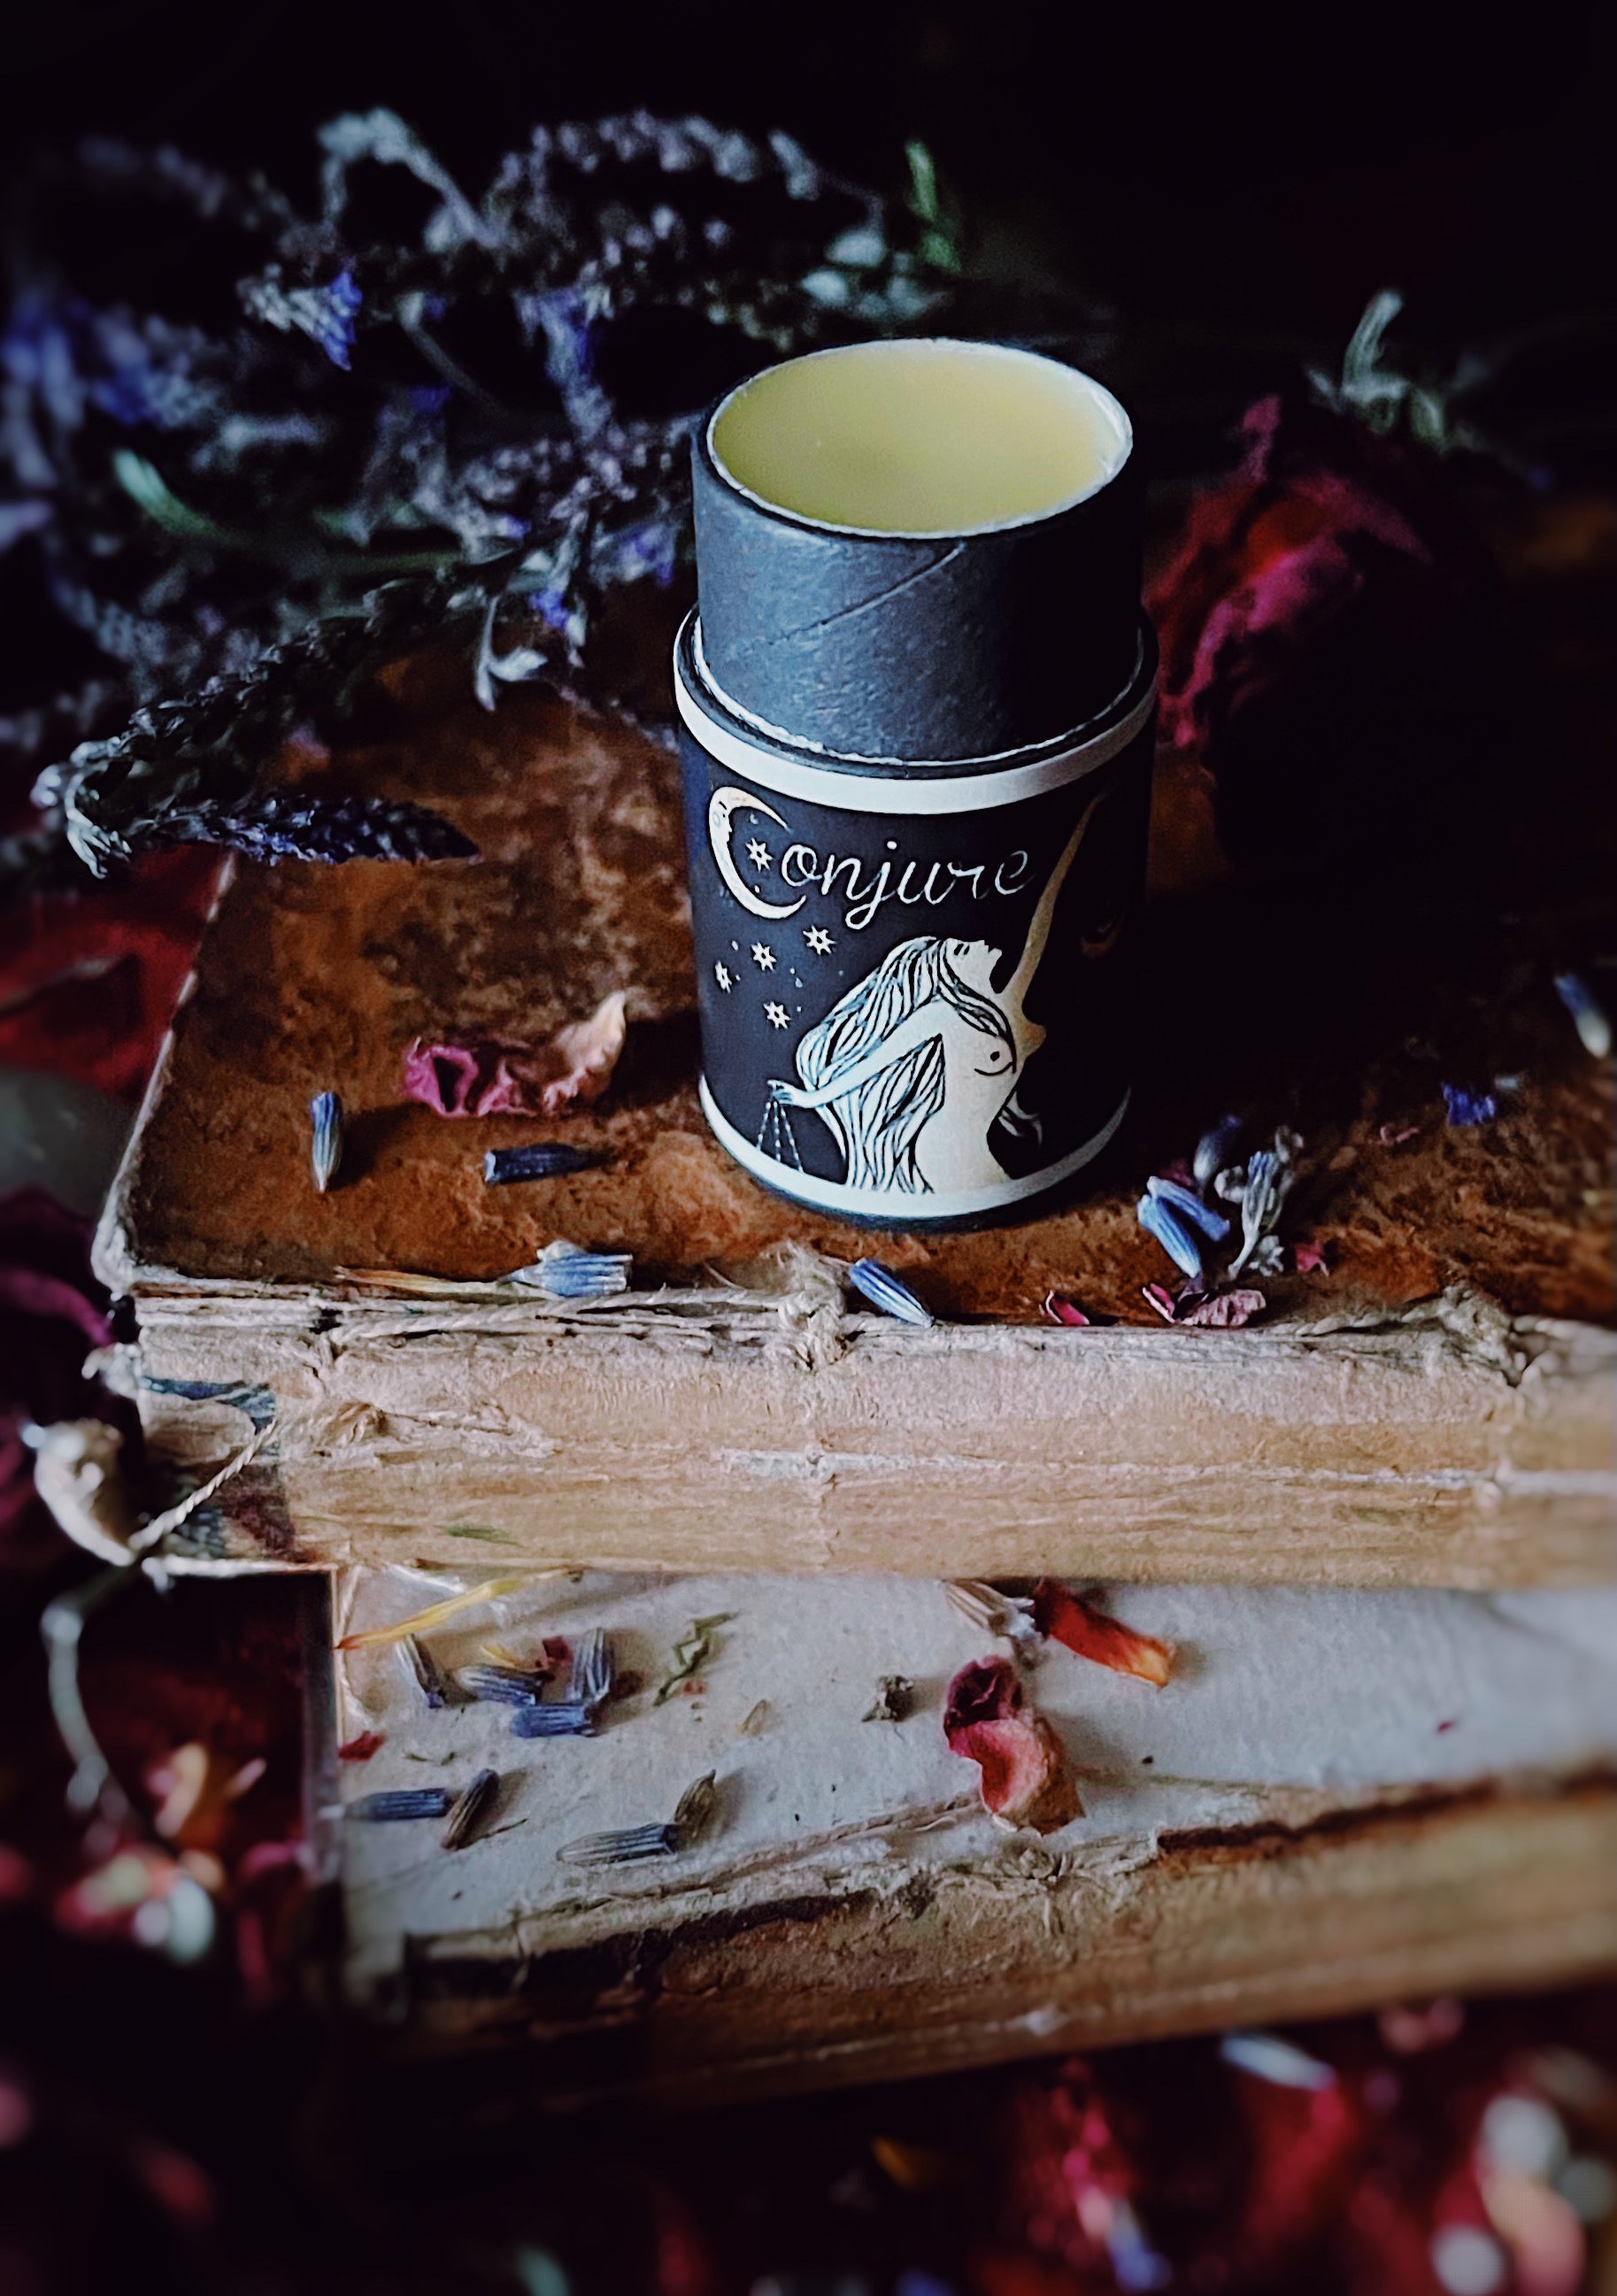 Conjure Solid Perfume